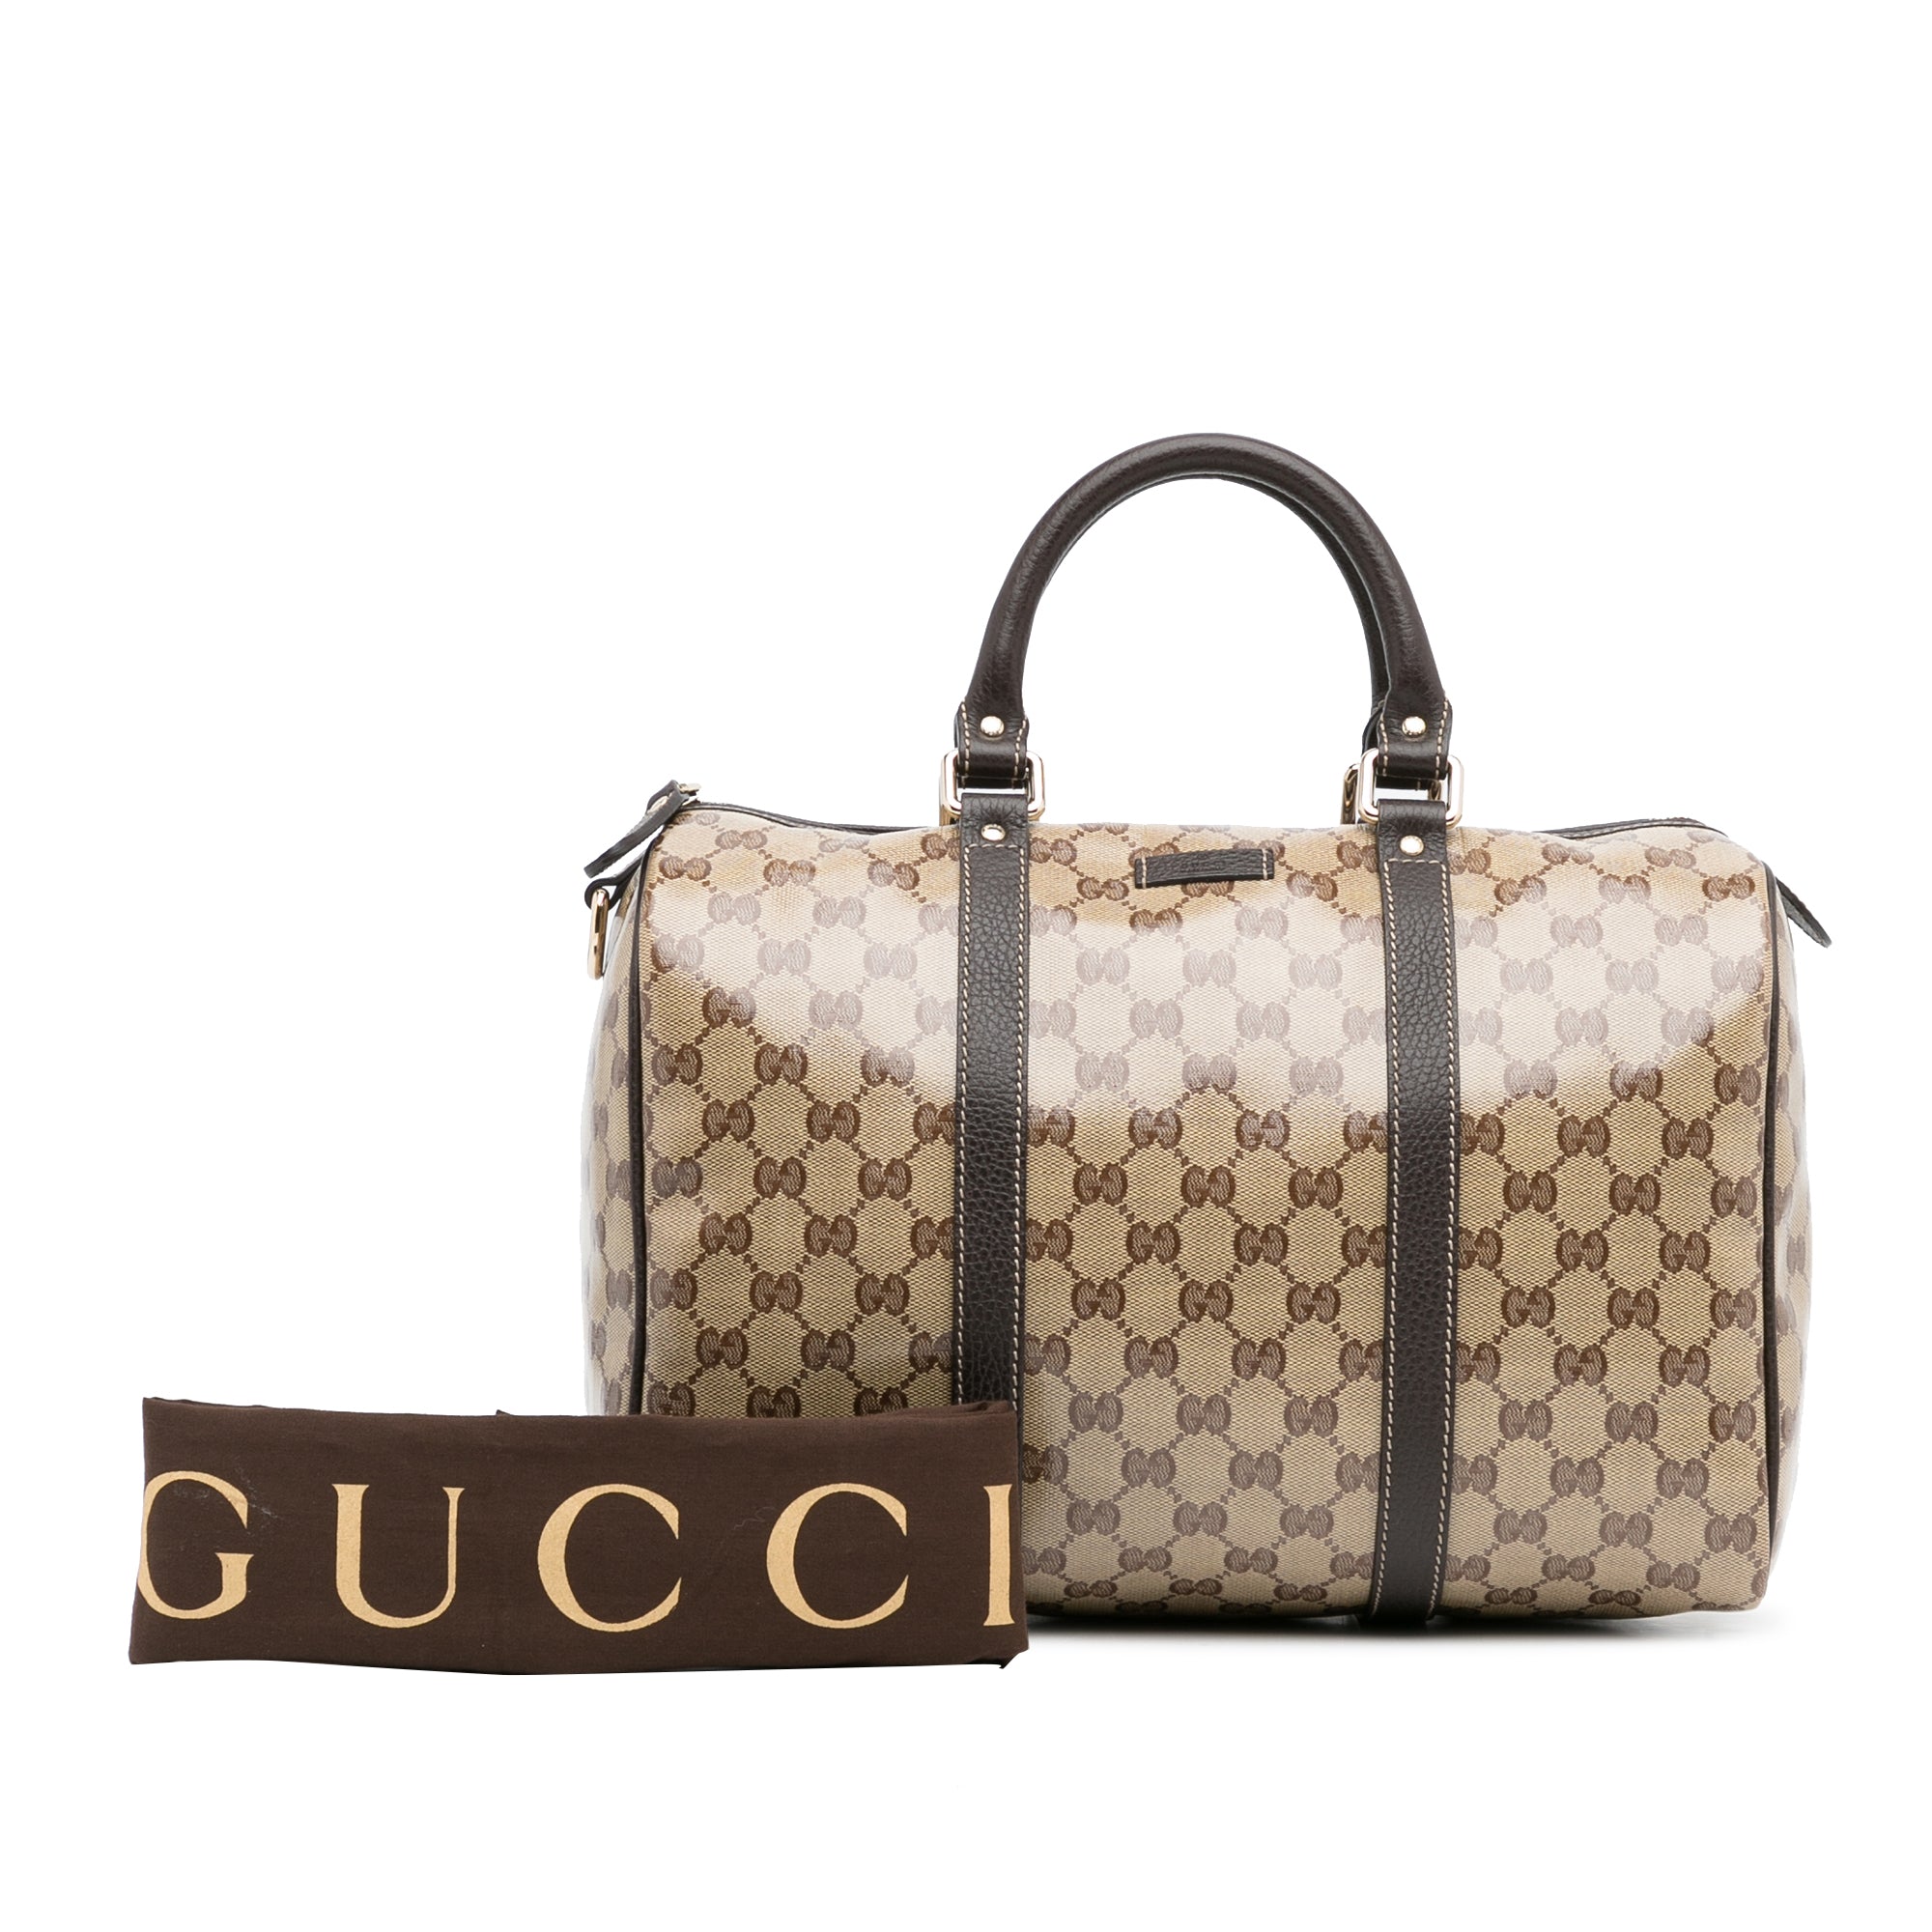 Authentic Gucci bag speedy black leather 265697, Luxury, Bags